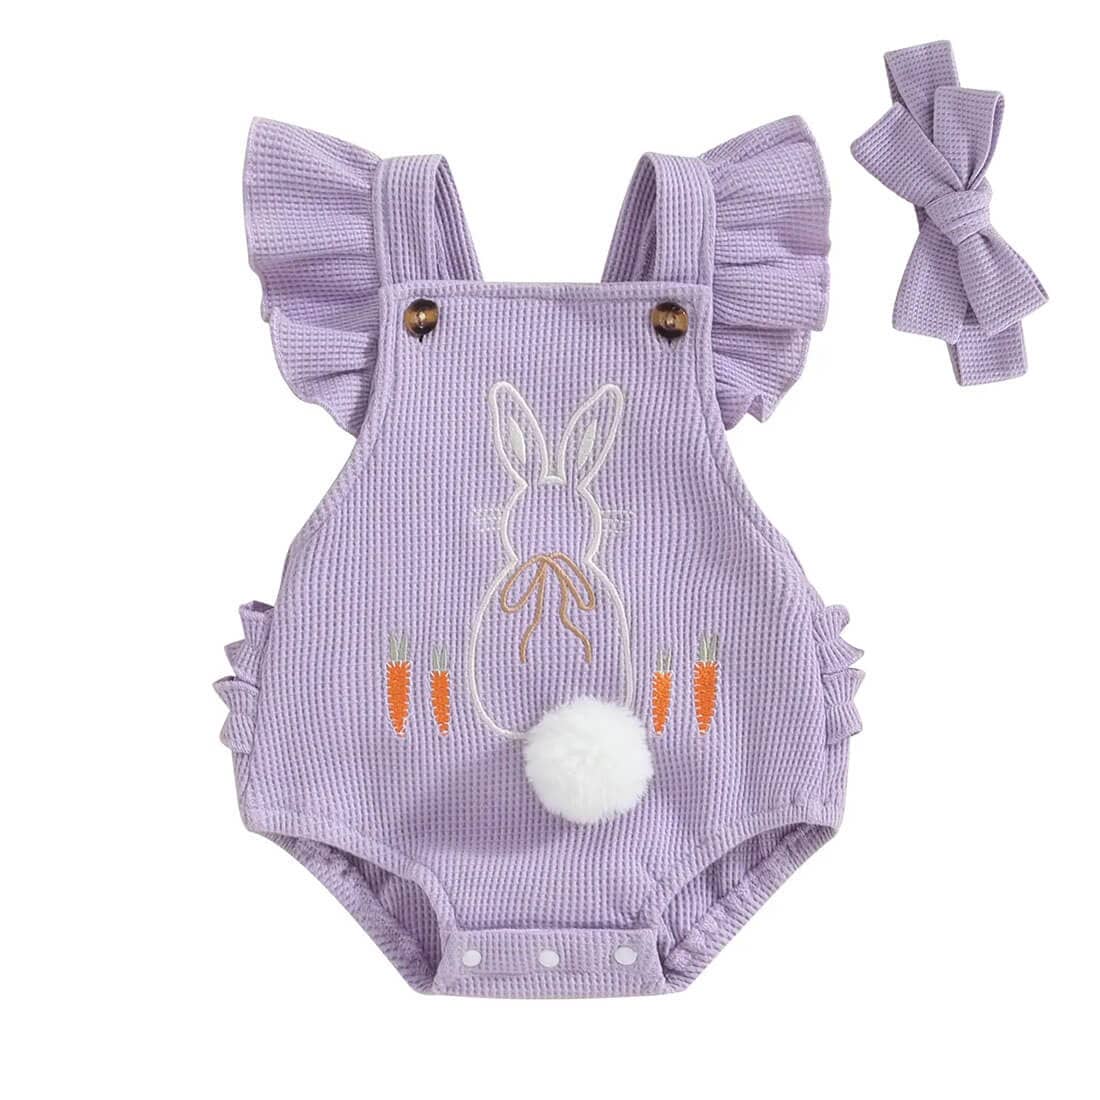 Fly Sleeve Bunny Backless Baby Romper Purple 0-3 M 